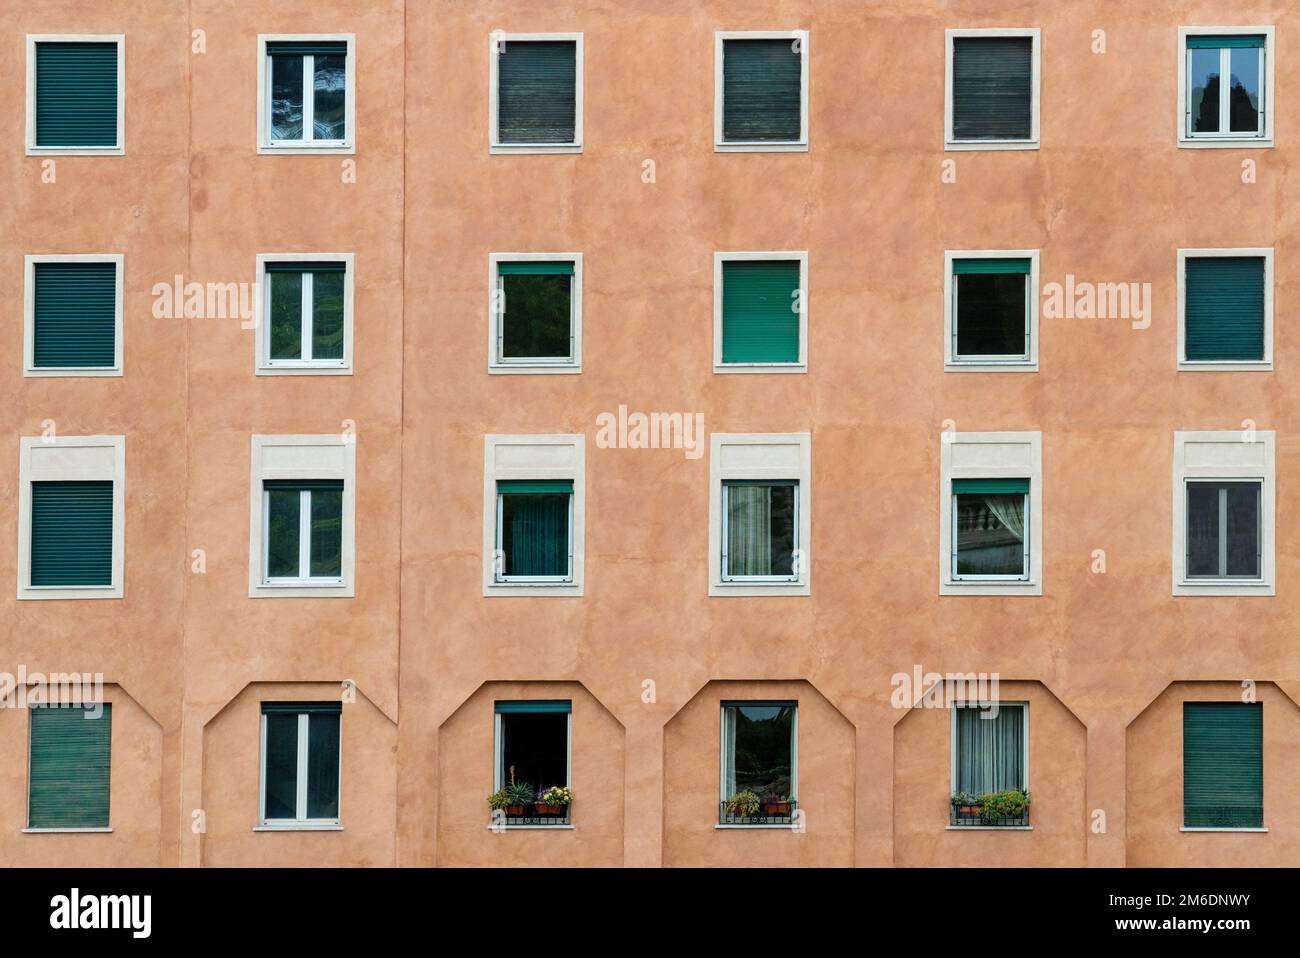 Frontal view of the facade of building with a lot of windows. Stock Photo